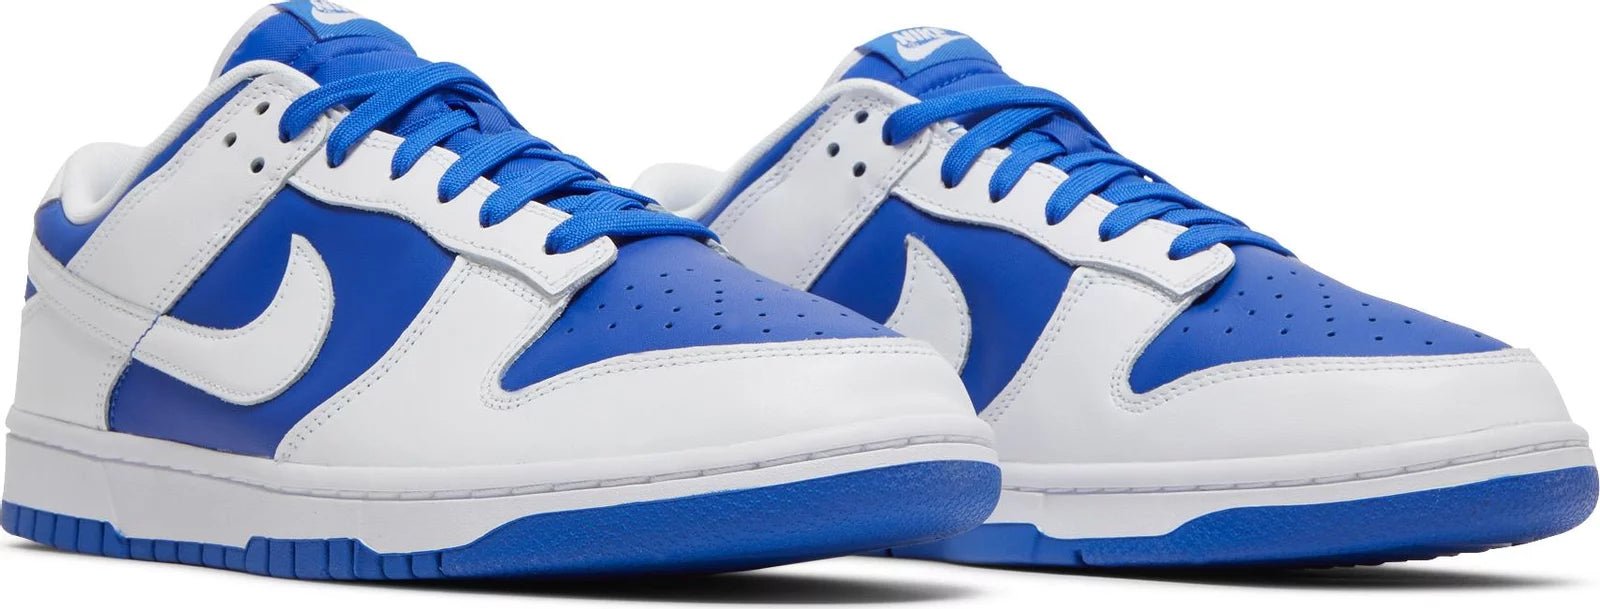 Nike Dunk Low Racer Blue White - Supra Sneakers